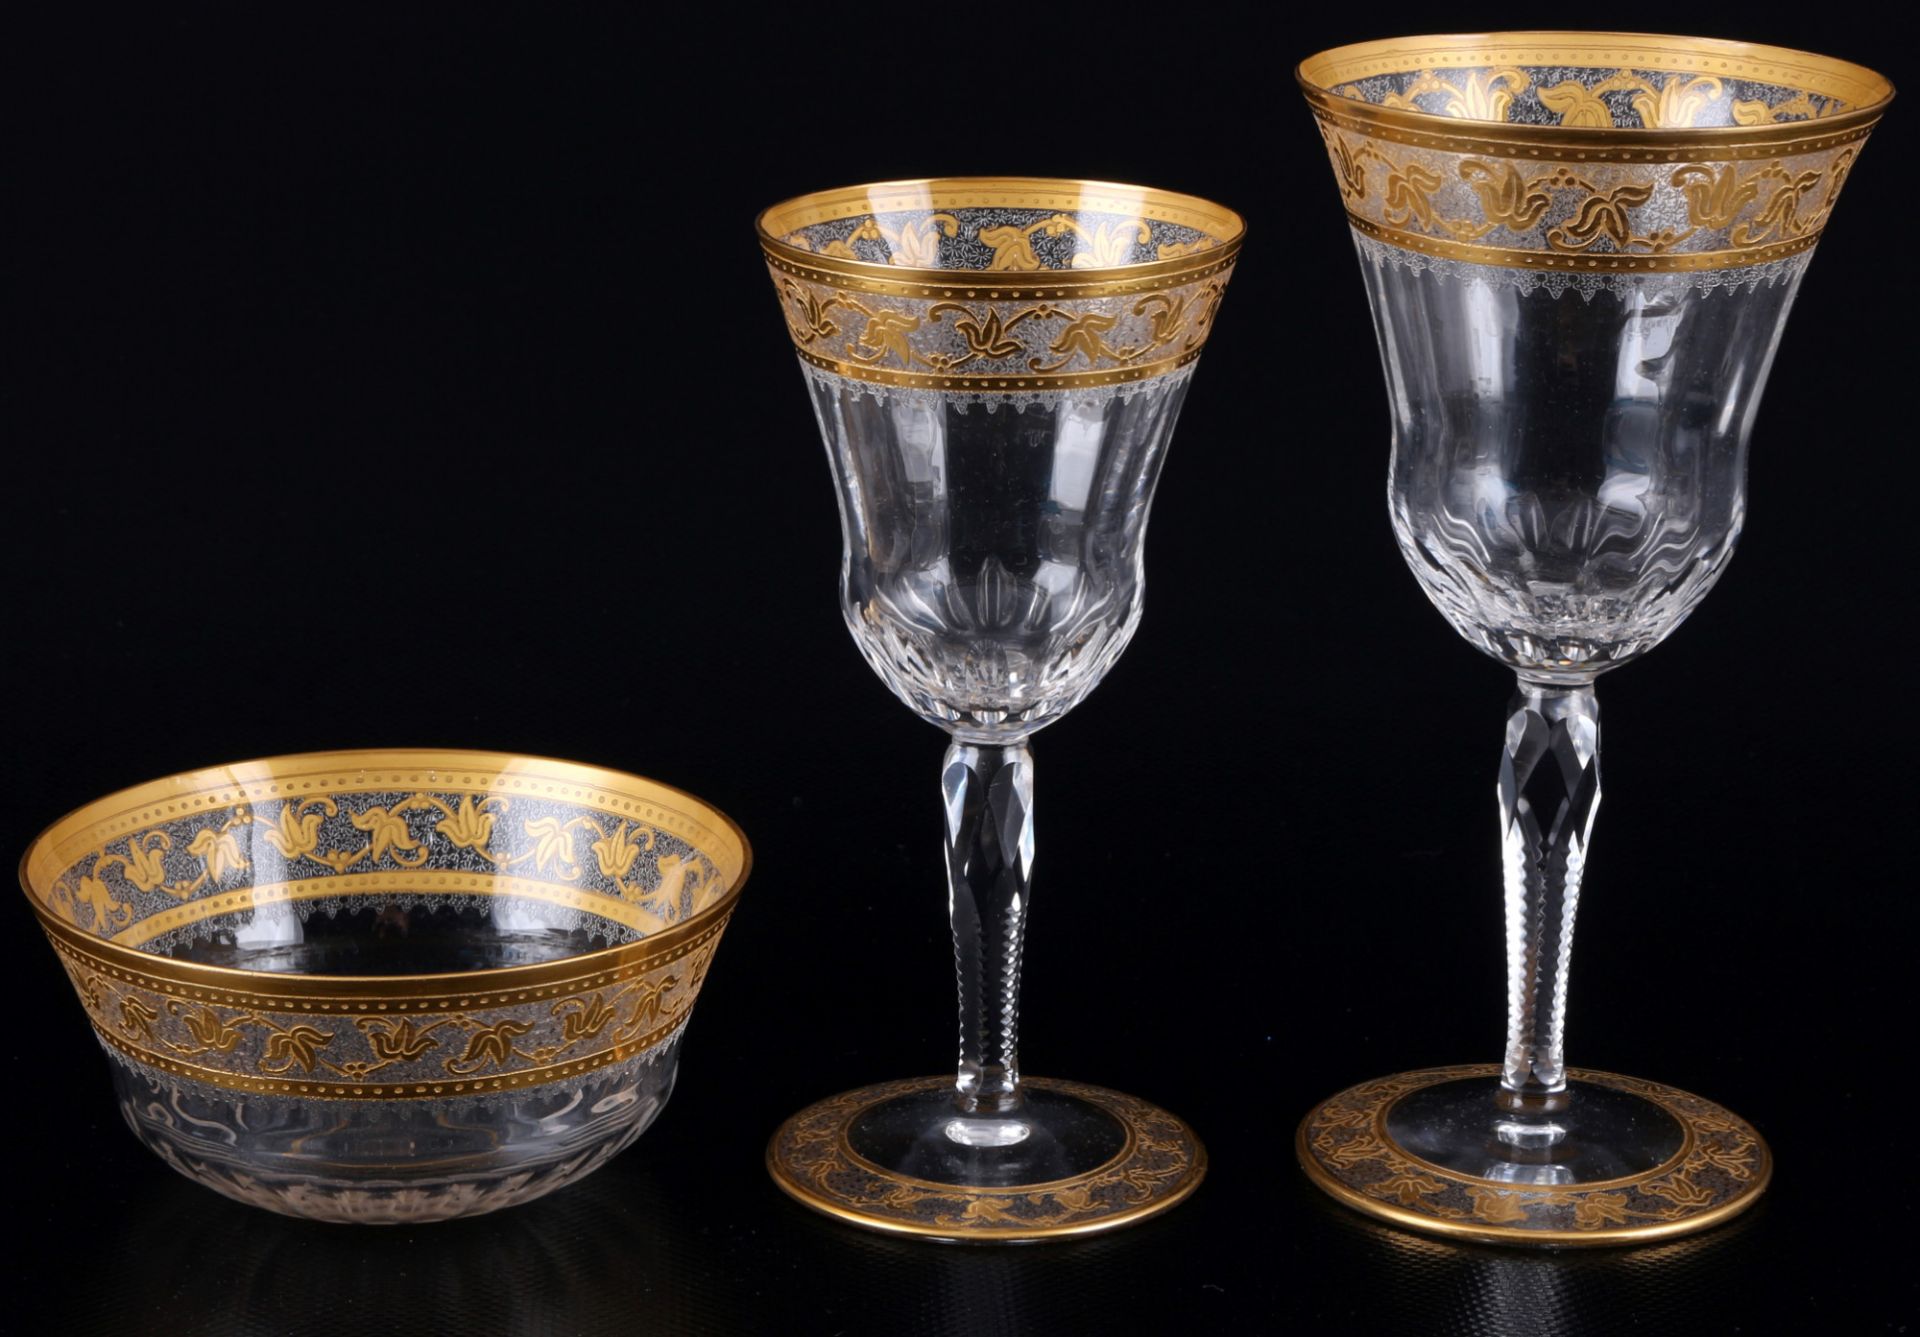 St. Louis Callot Gold glass set for 3 persons, - Image 2 of 2